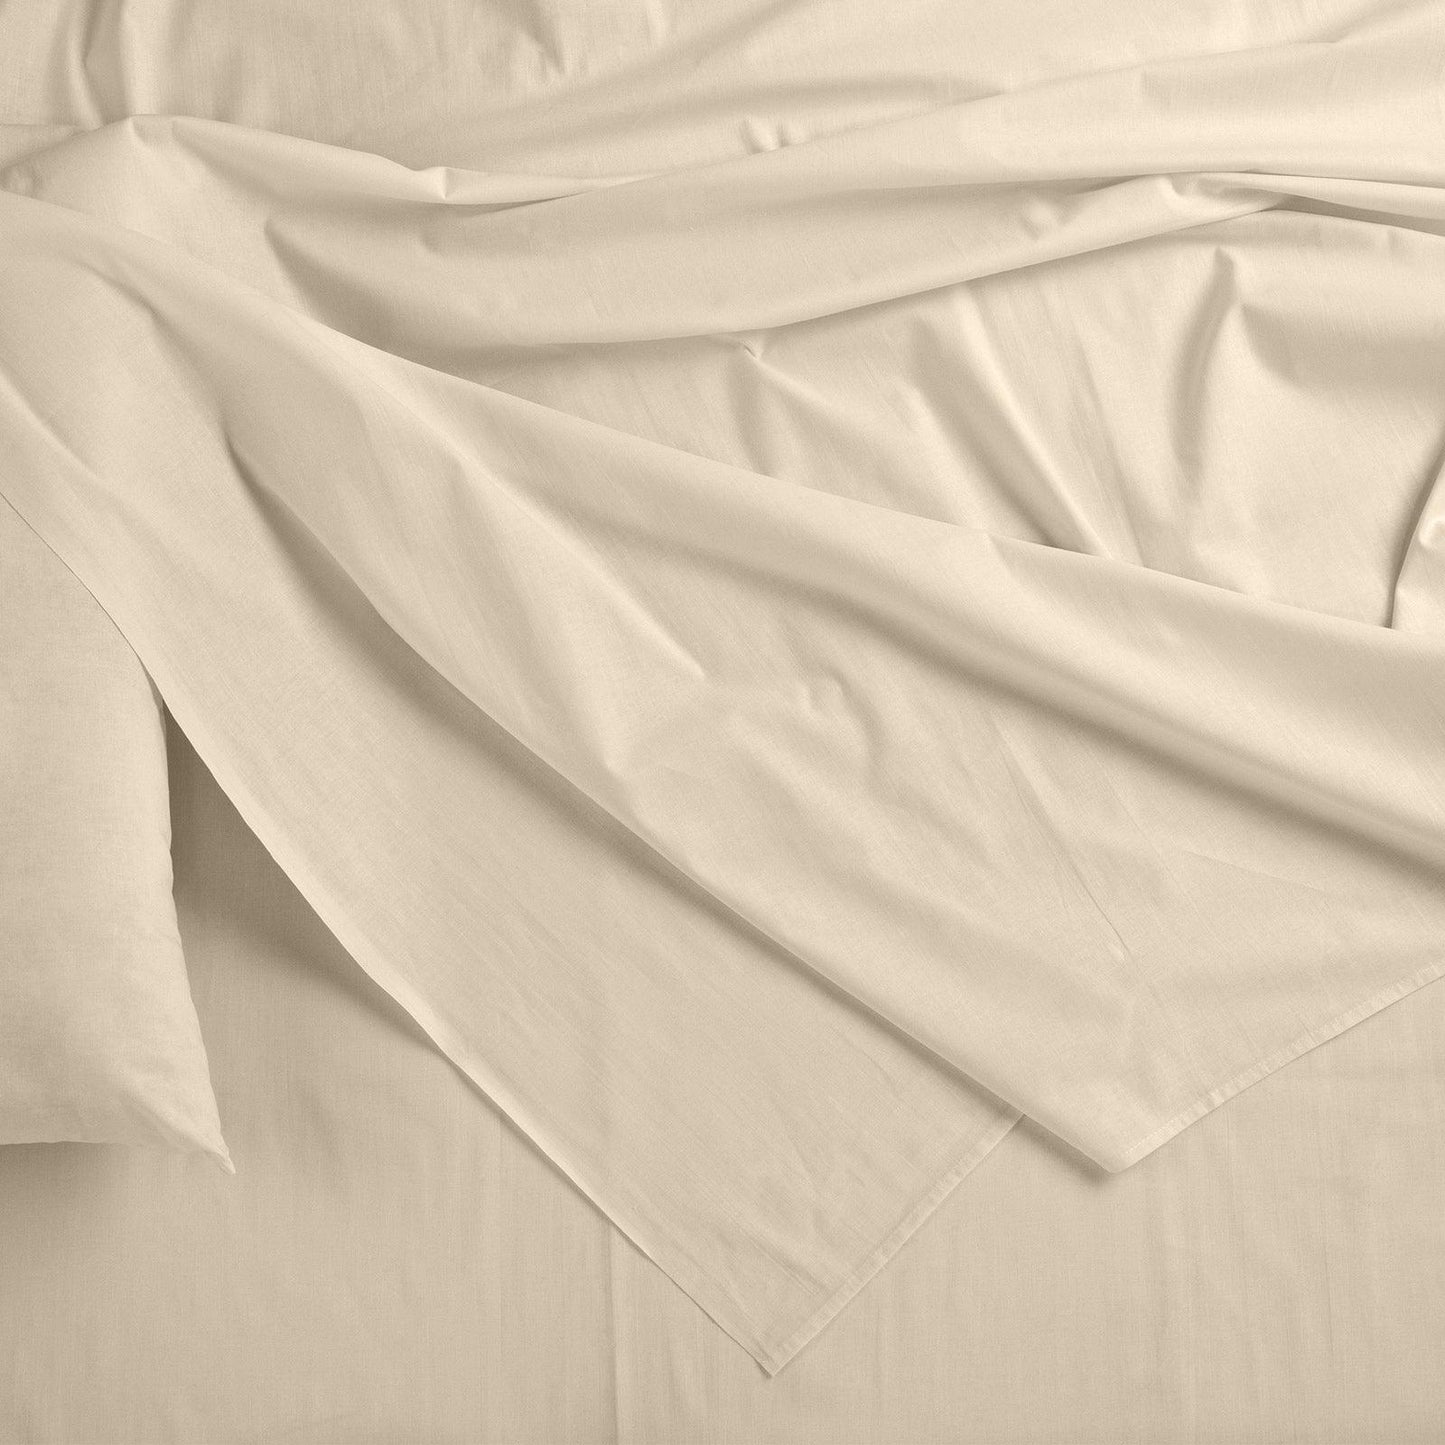 Royal Comfort Bamboo Blended Sheet & Pillowcases Set 1000TC Ultra Soft Bedding - Queen - Ivory